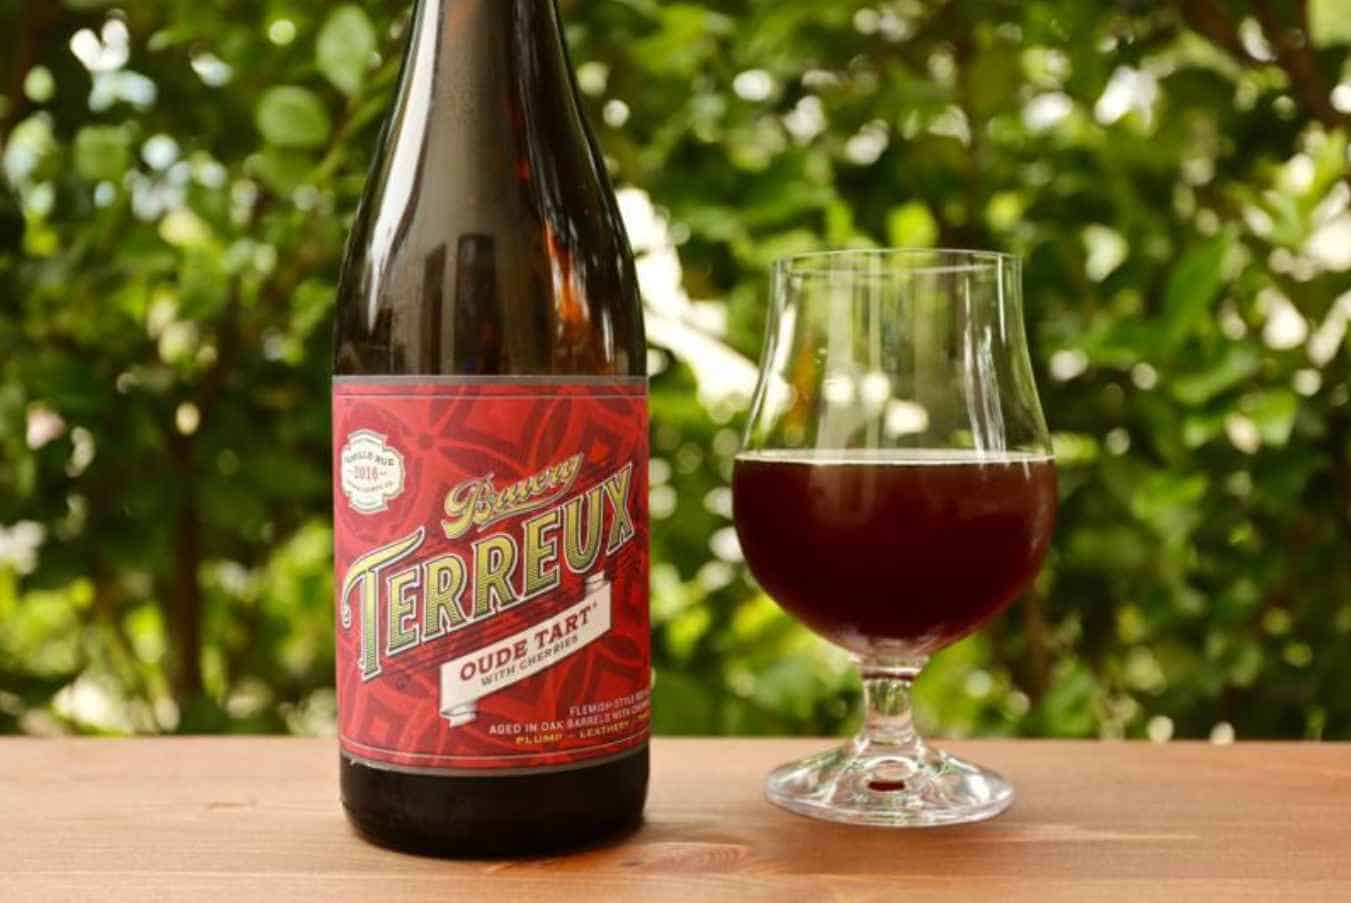 Oude Tart by Bruery Terreux